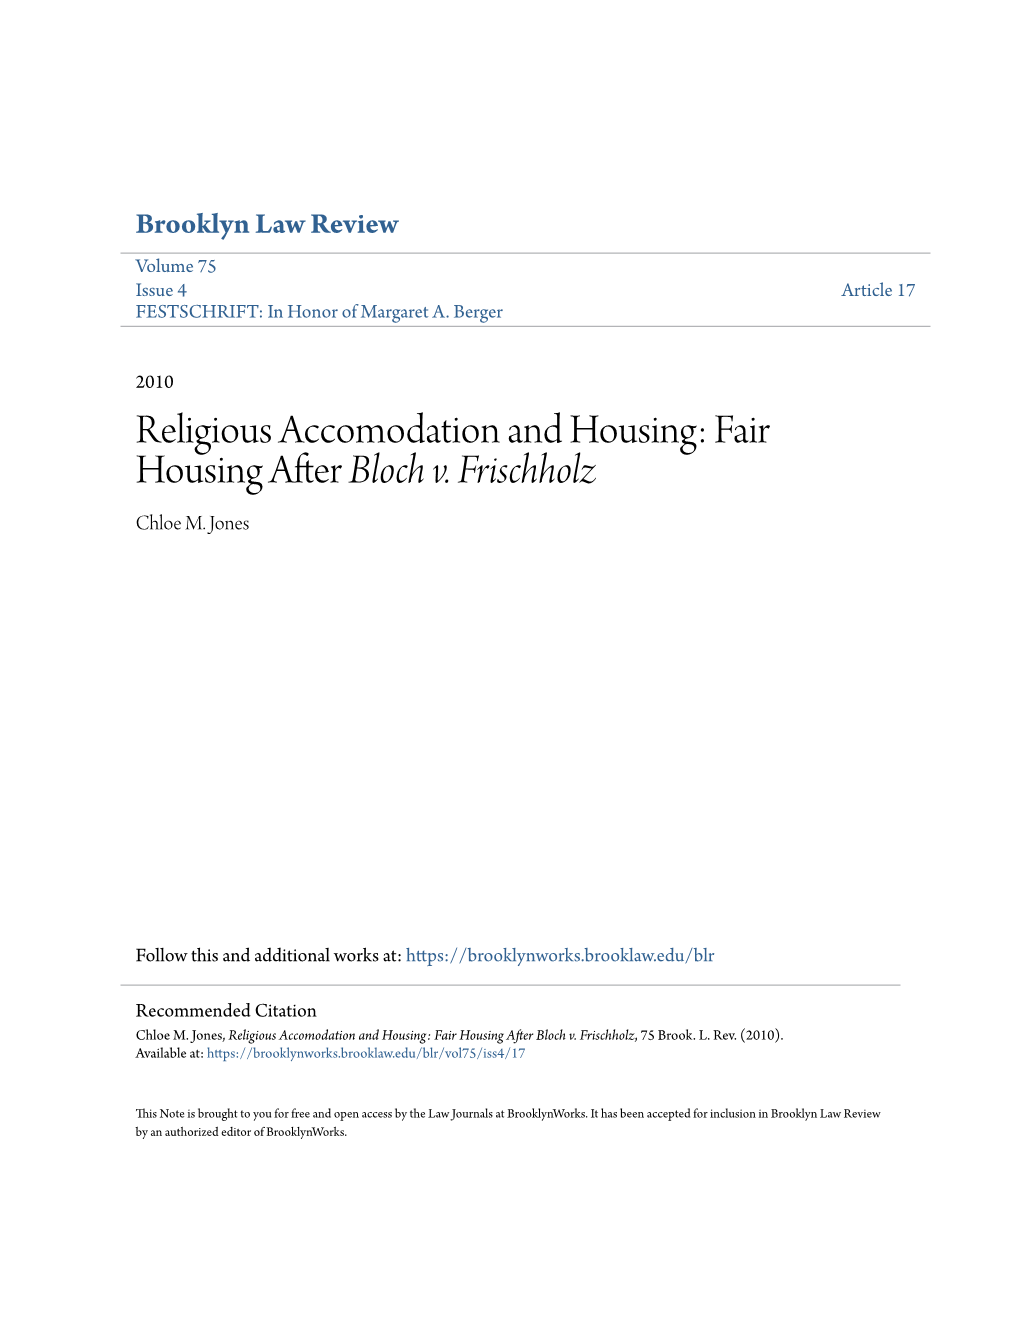 Religious Accomodation and Housing: Fair Housing After Bloch V